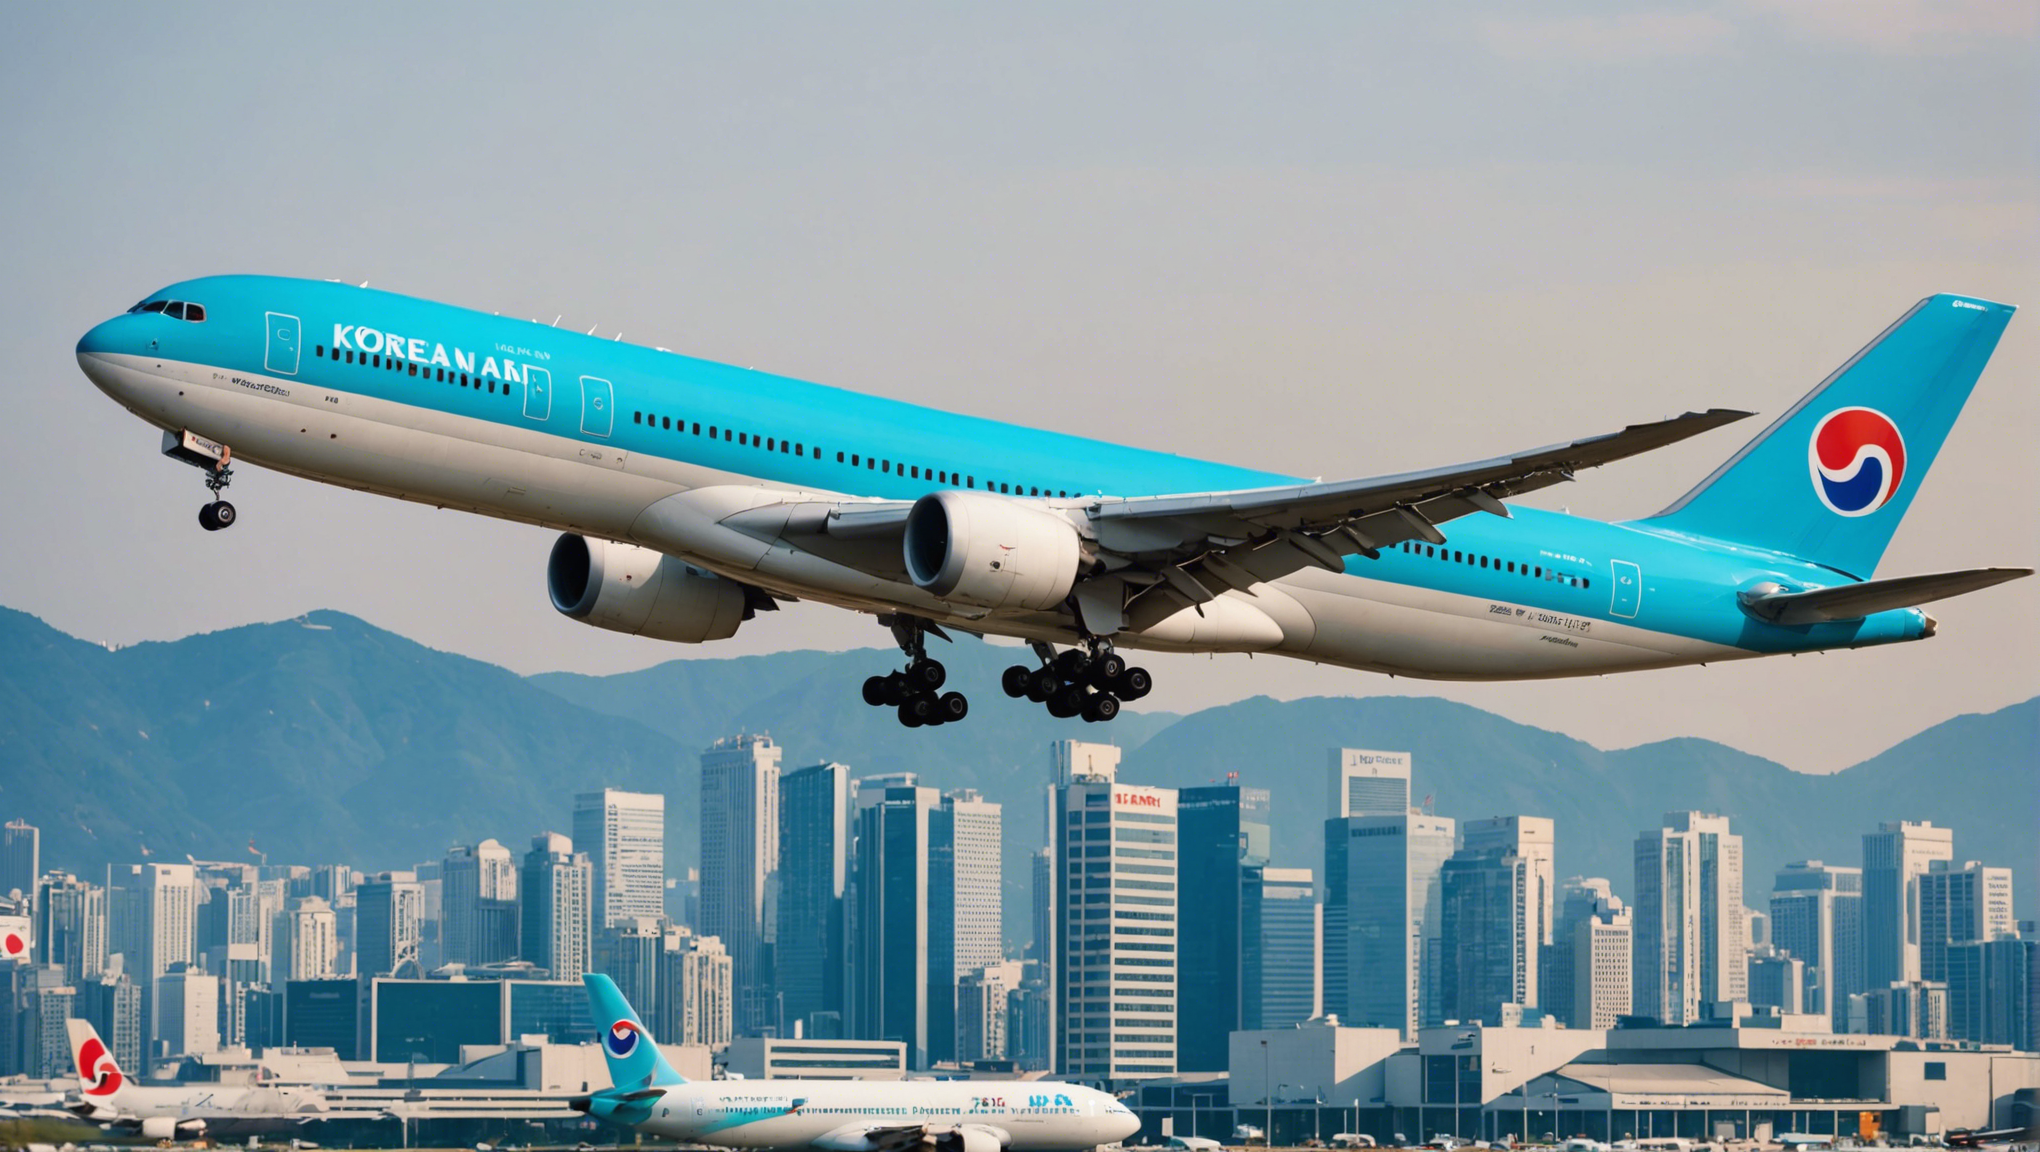 discover korean air's new routes in china and japan, strengthening its presence in these key asian destinations.